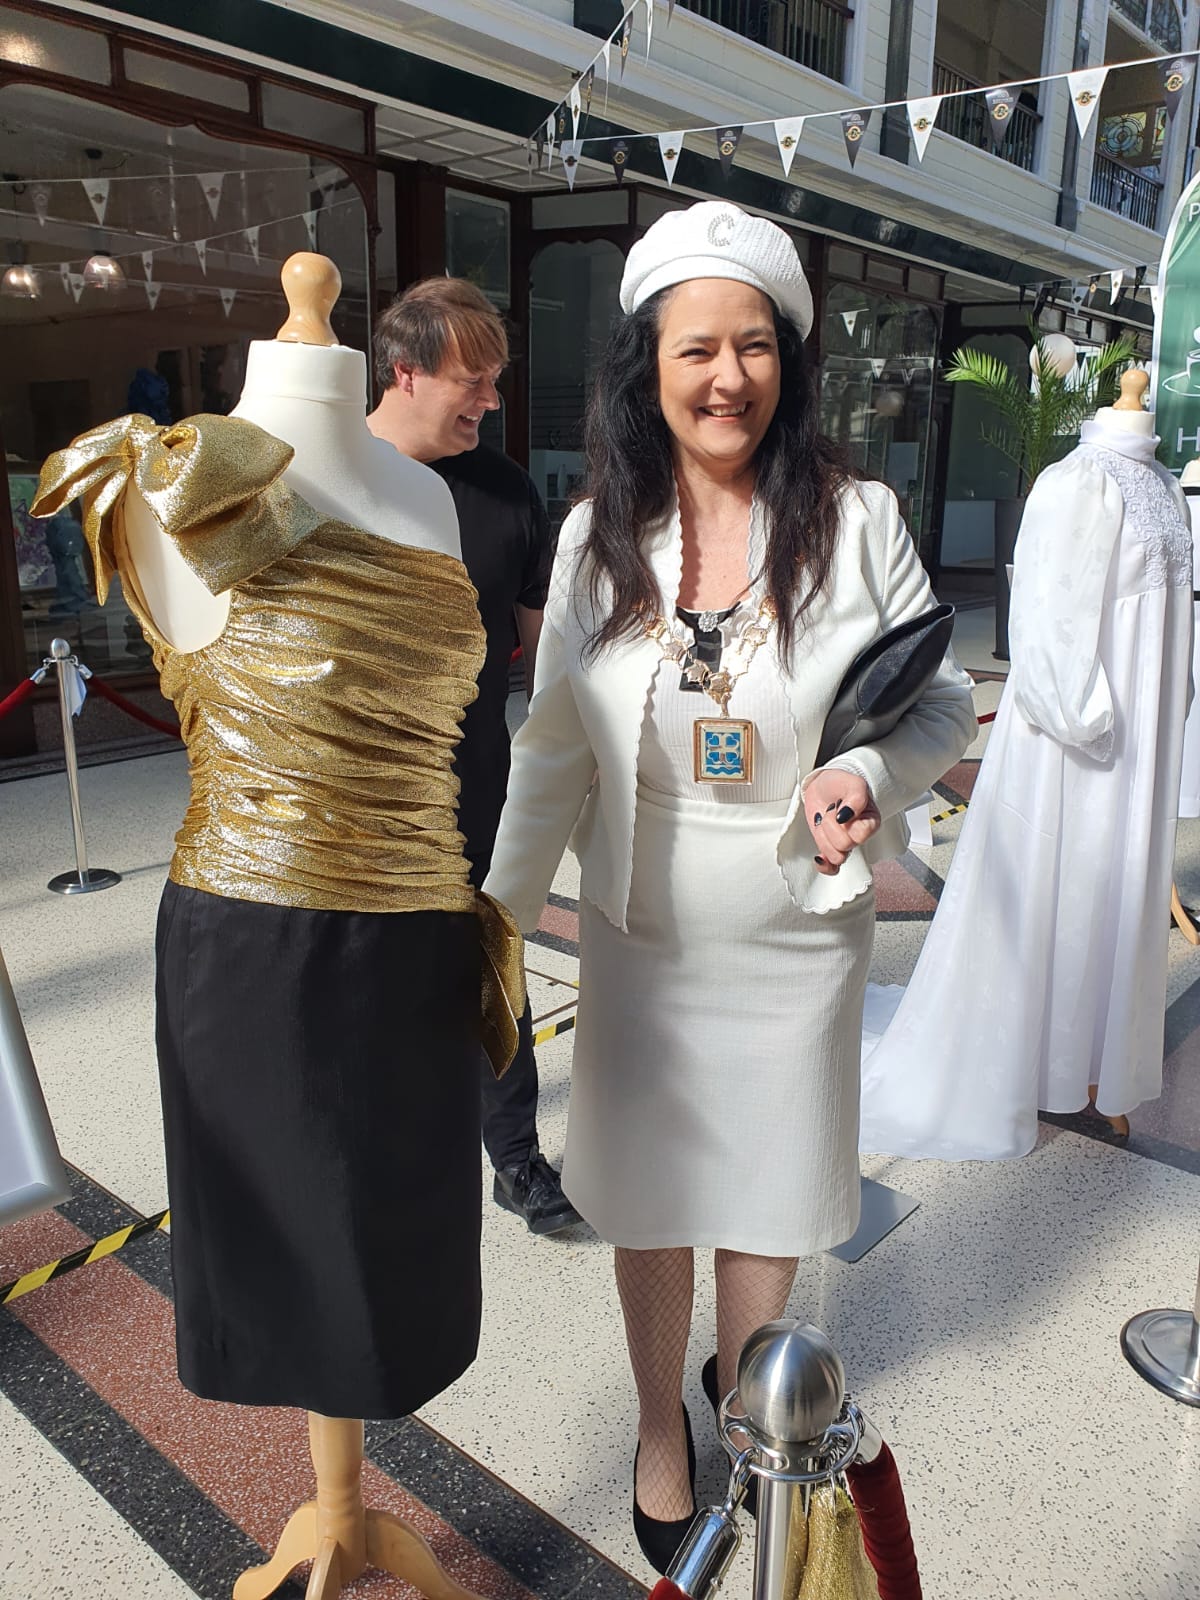 Mayor of Sefton Cllr Clare Carragher has praised a local fashion designer Mark Lyon Taylor who has created beautiful vintage fashion from every decade going back to the 1890s at Wayfarers Arcade in Southport